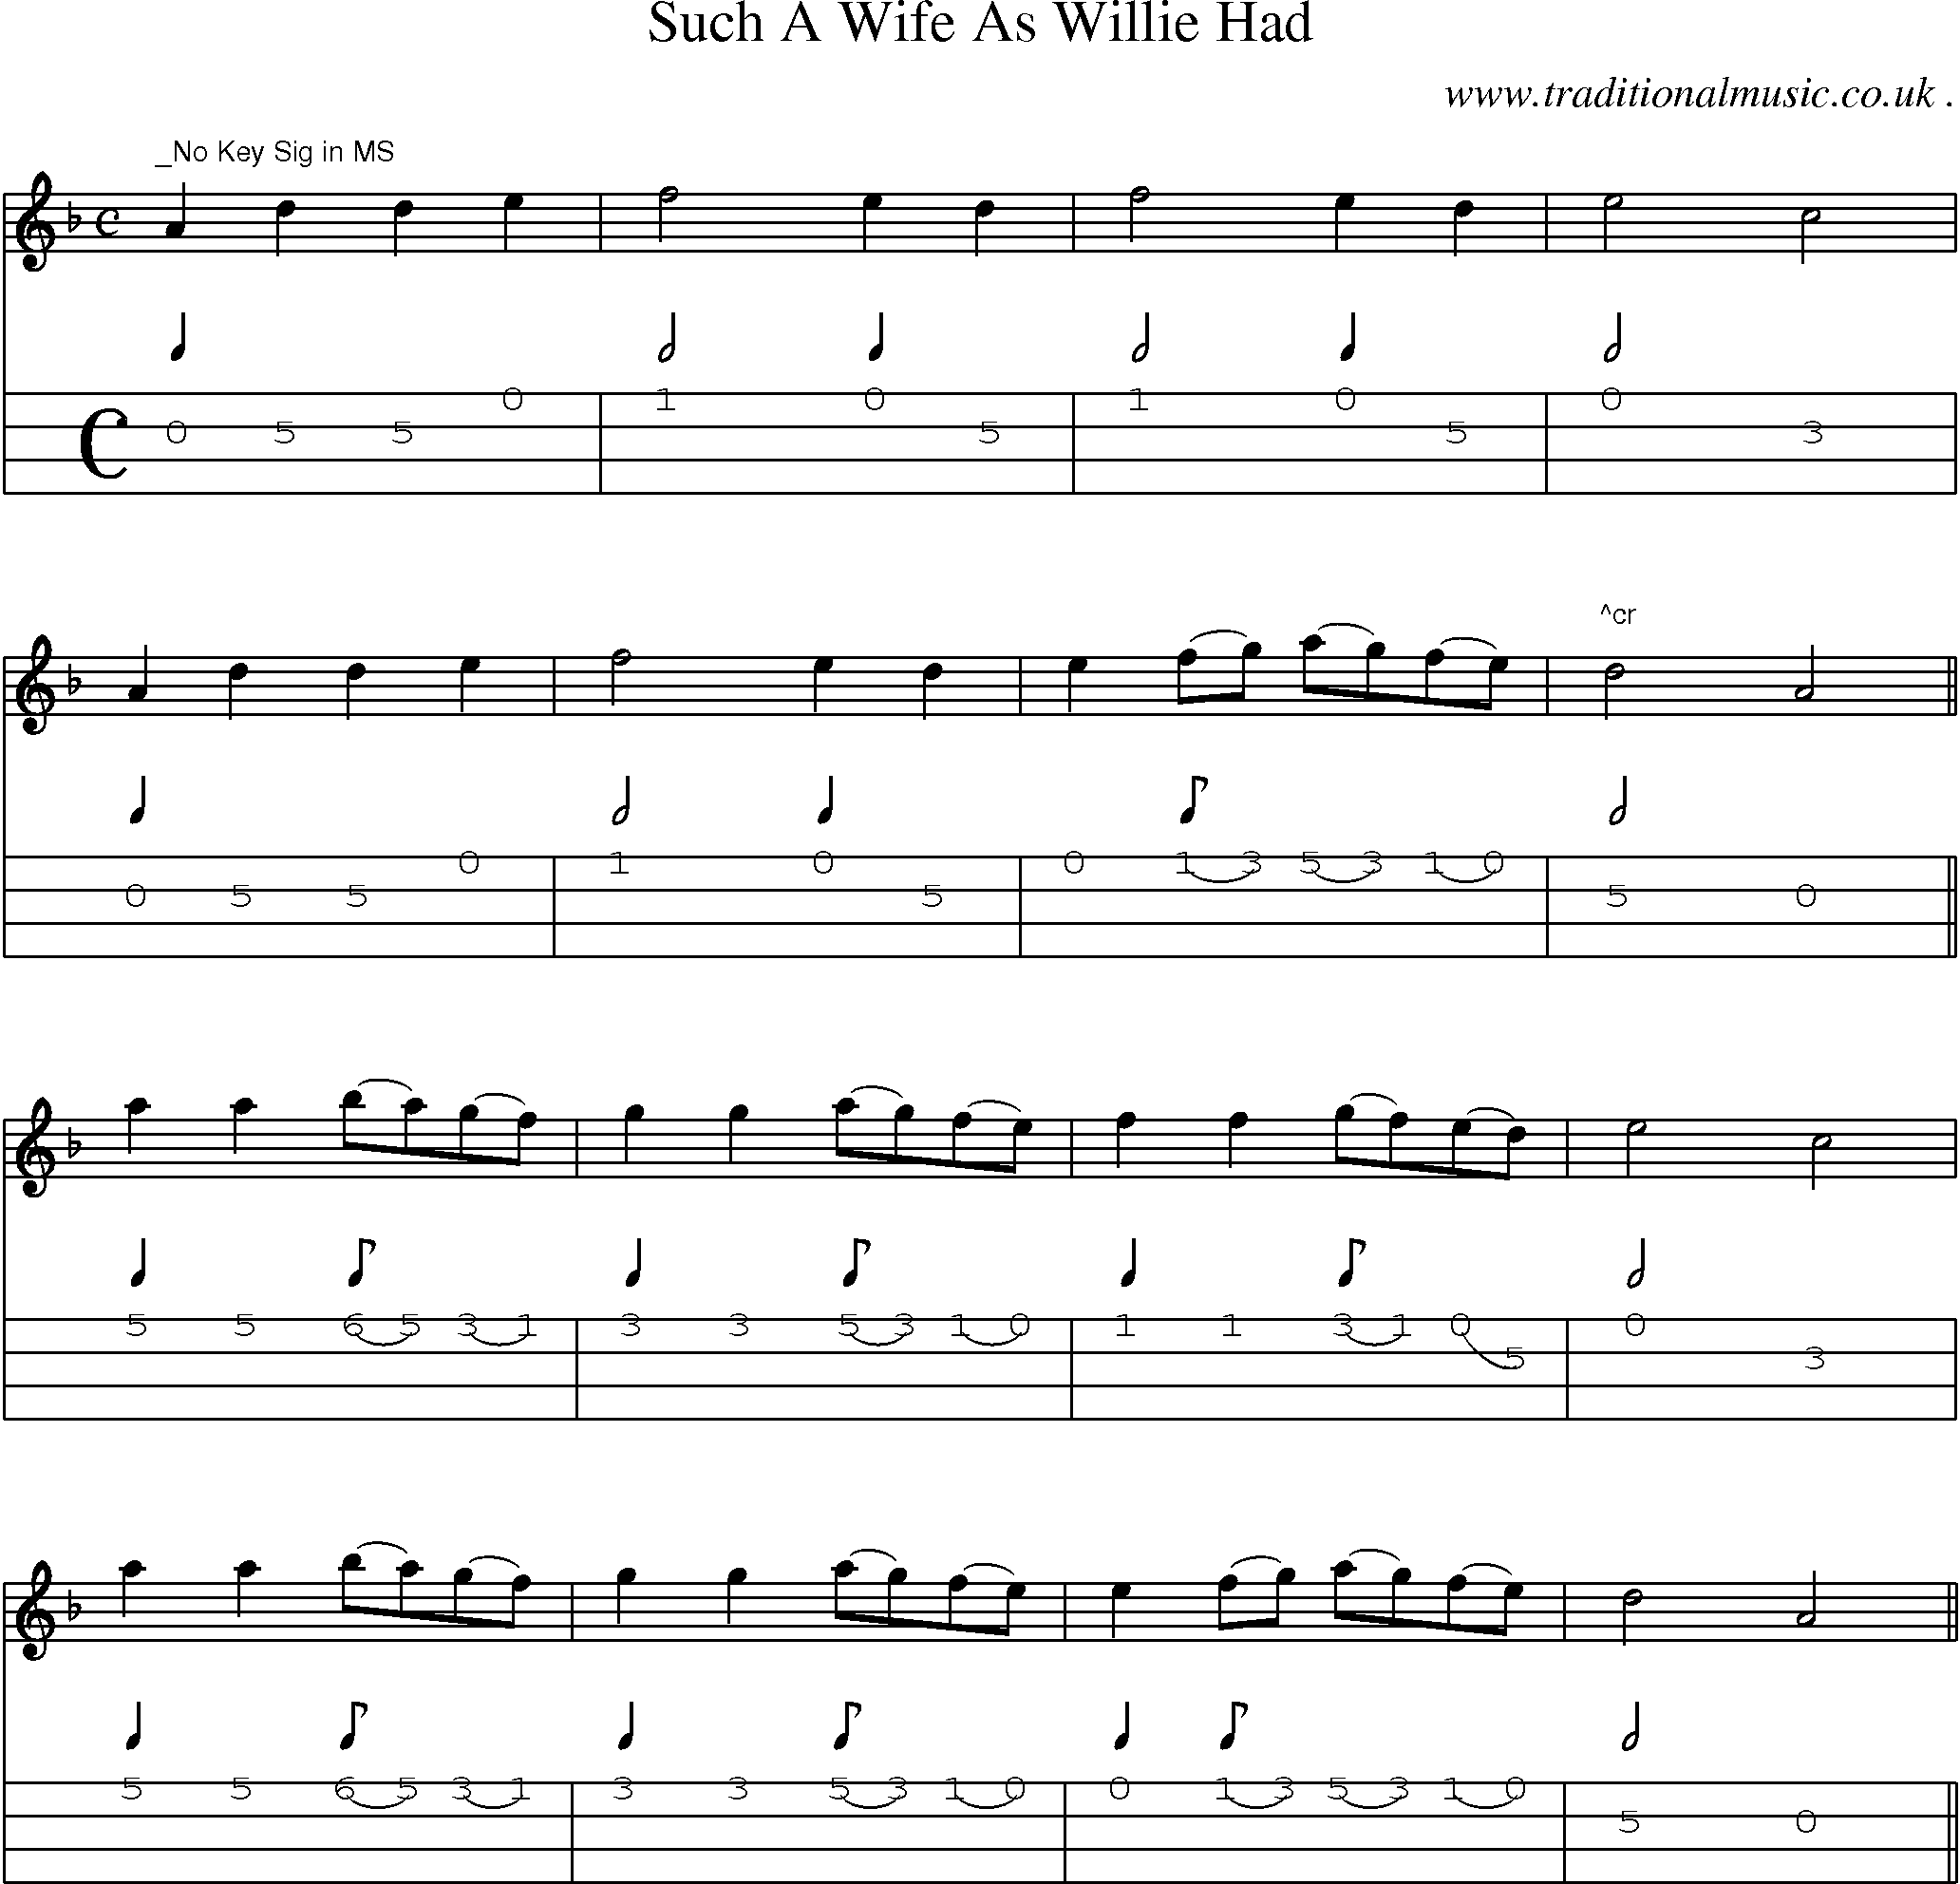 Sheet-Music and Mandolin Tabs for Such A Wife As Willie Had